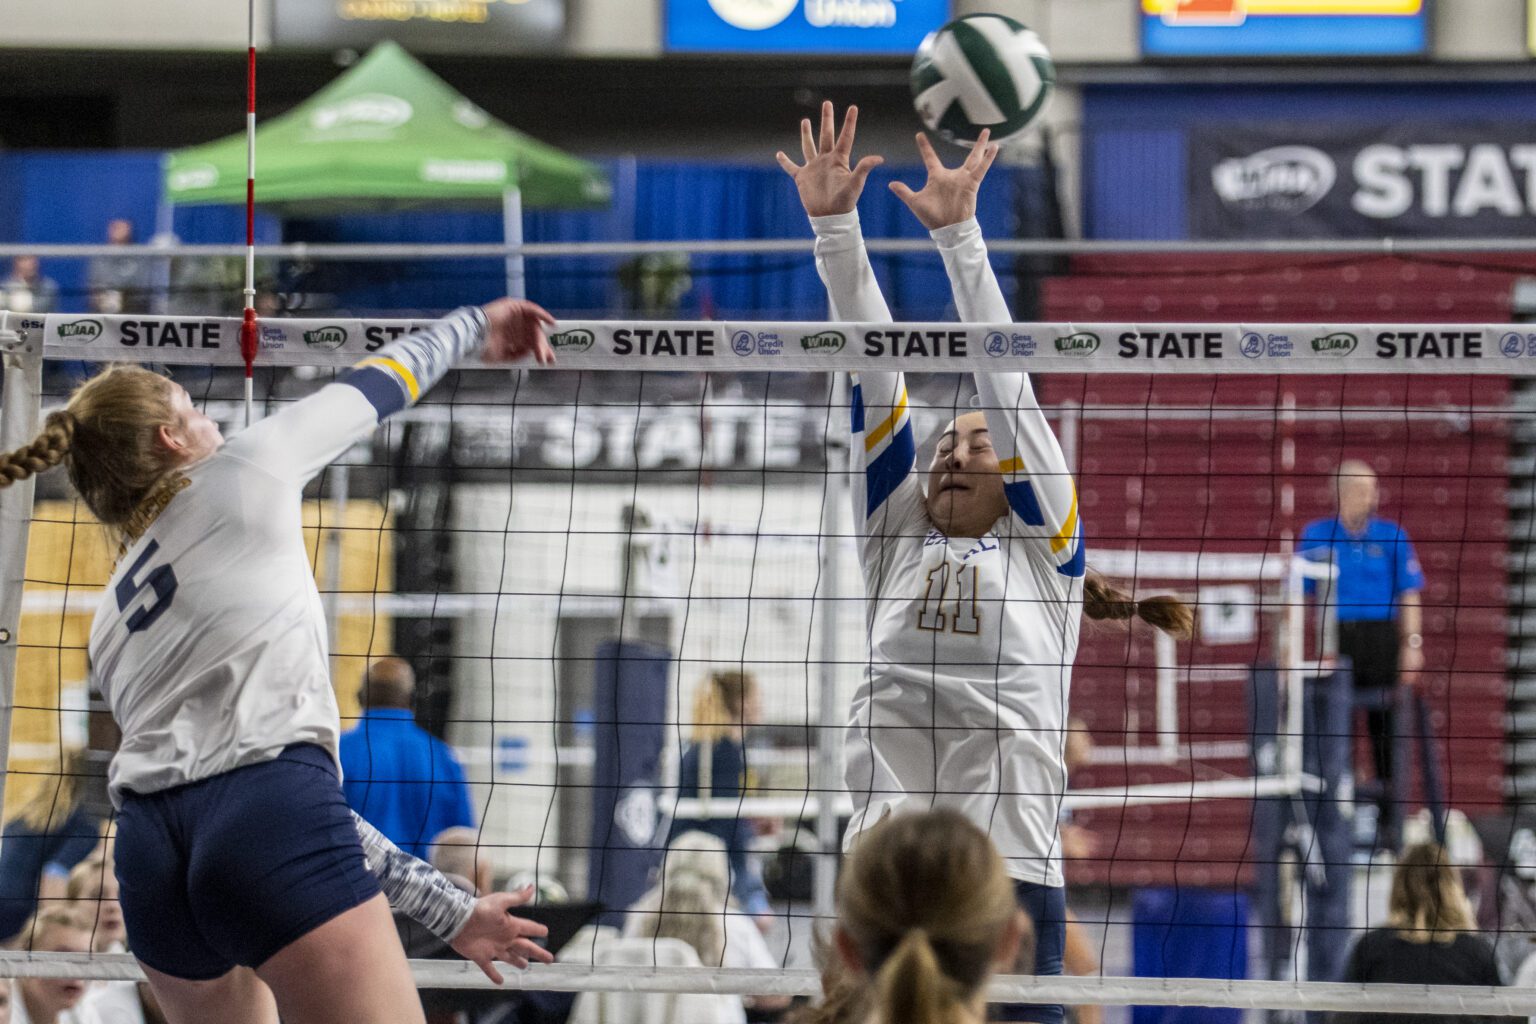 Ferndale's Jillia Fox (11) attempts to block a Mead shot during the 3A state quarterfinals at the Yakima Valley SunDome on Nov. 17.